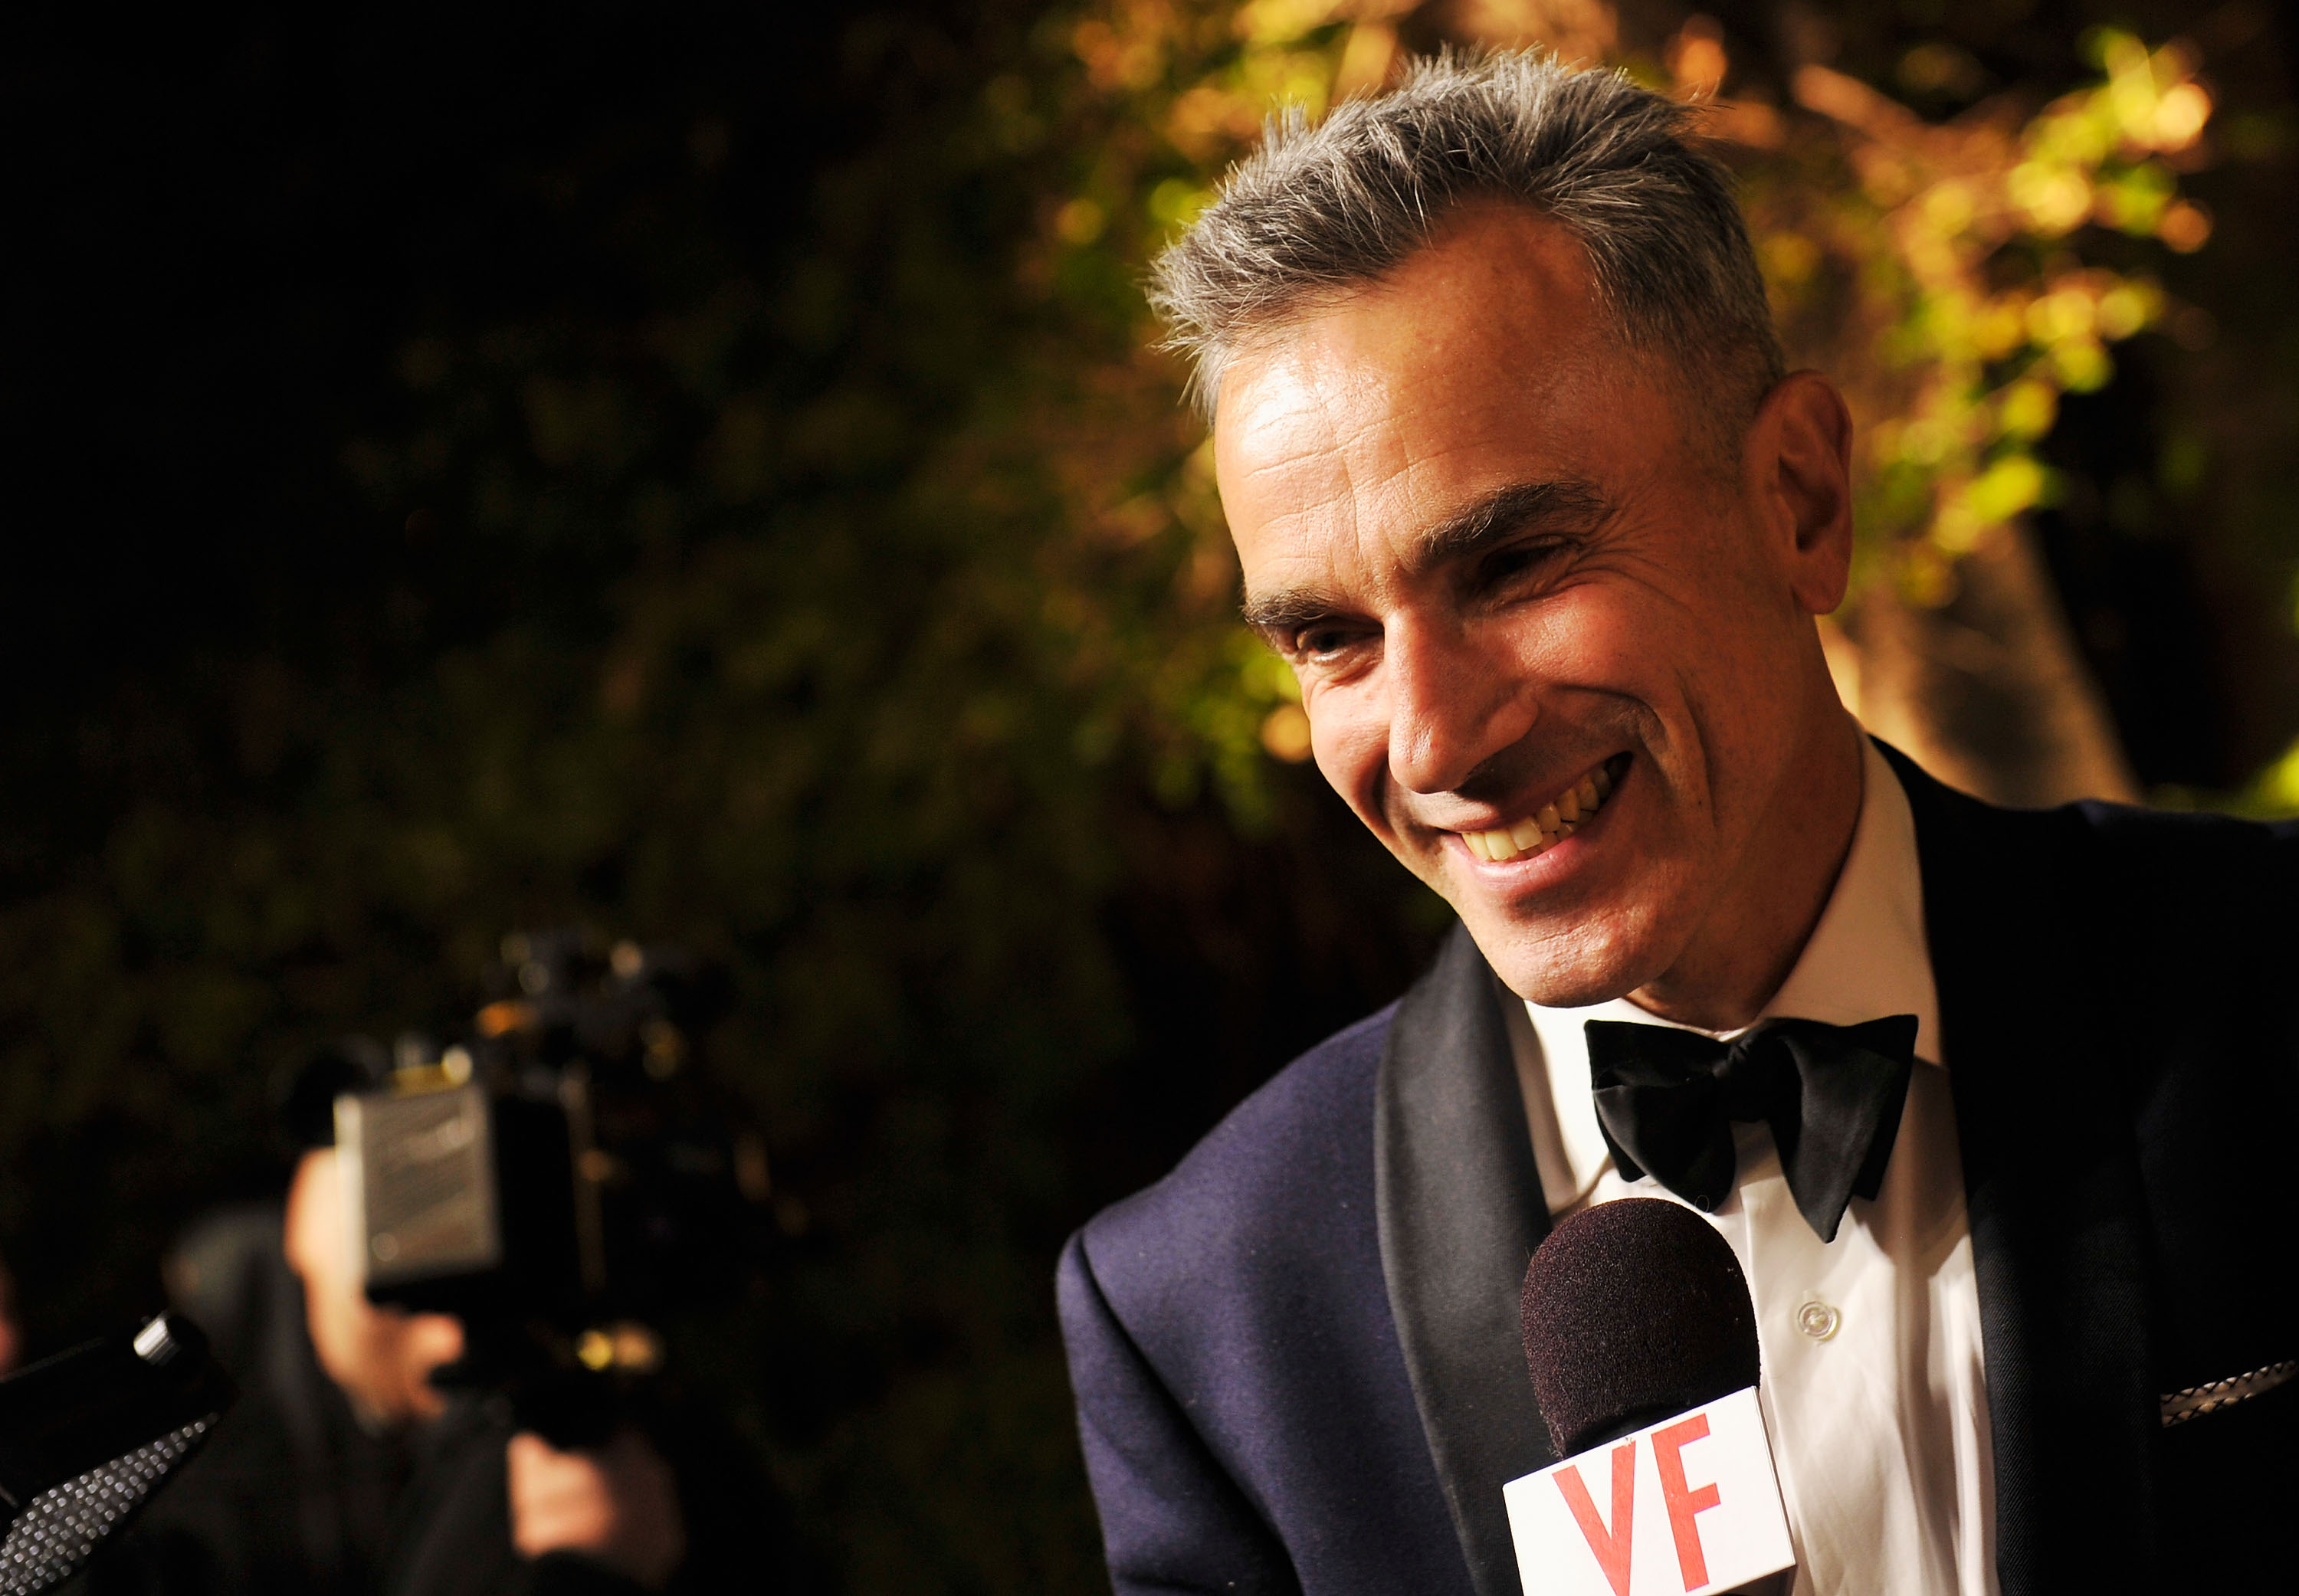 Daniel Day-Lewis arrives for the 2013 Vanity Fair Oscar Party hosted by Graydon Carter at Sunset Tower on February 24, 2013. (Larry Busacca/VF13—Getty Images for Vanity Fair)